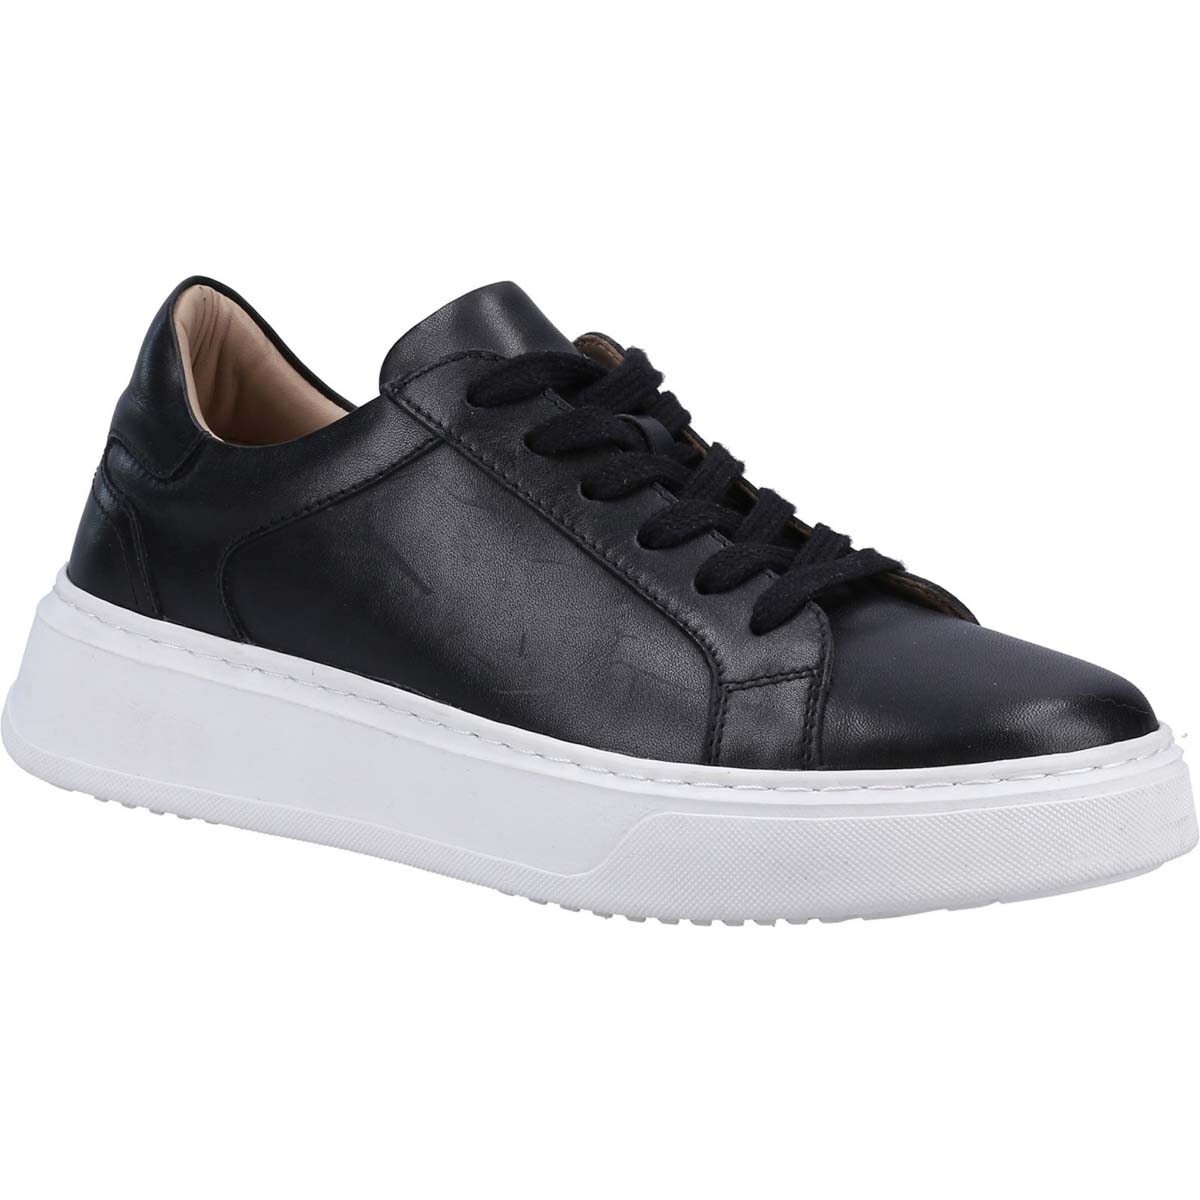 Hush Puppies Camille Black Womens trainers 36580-68191 in a Plain Leather in Size 8